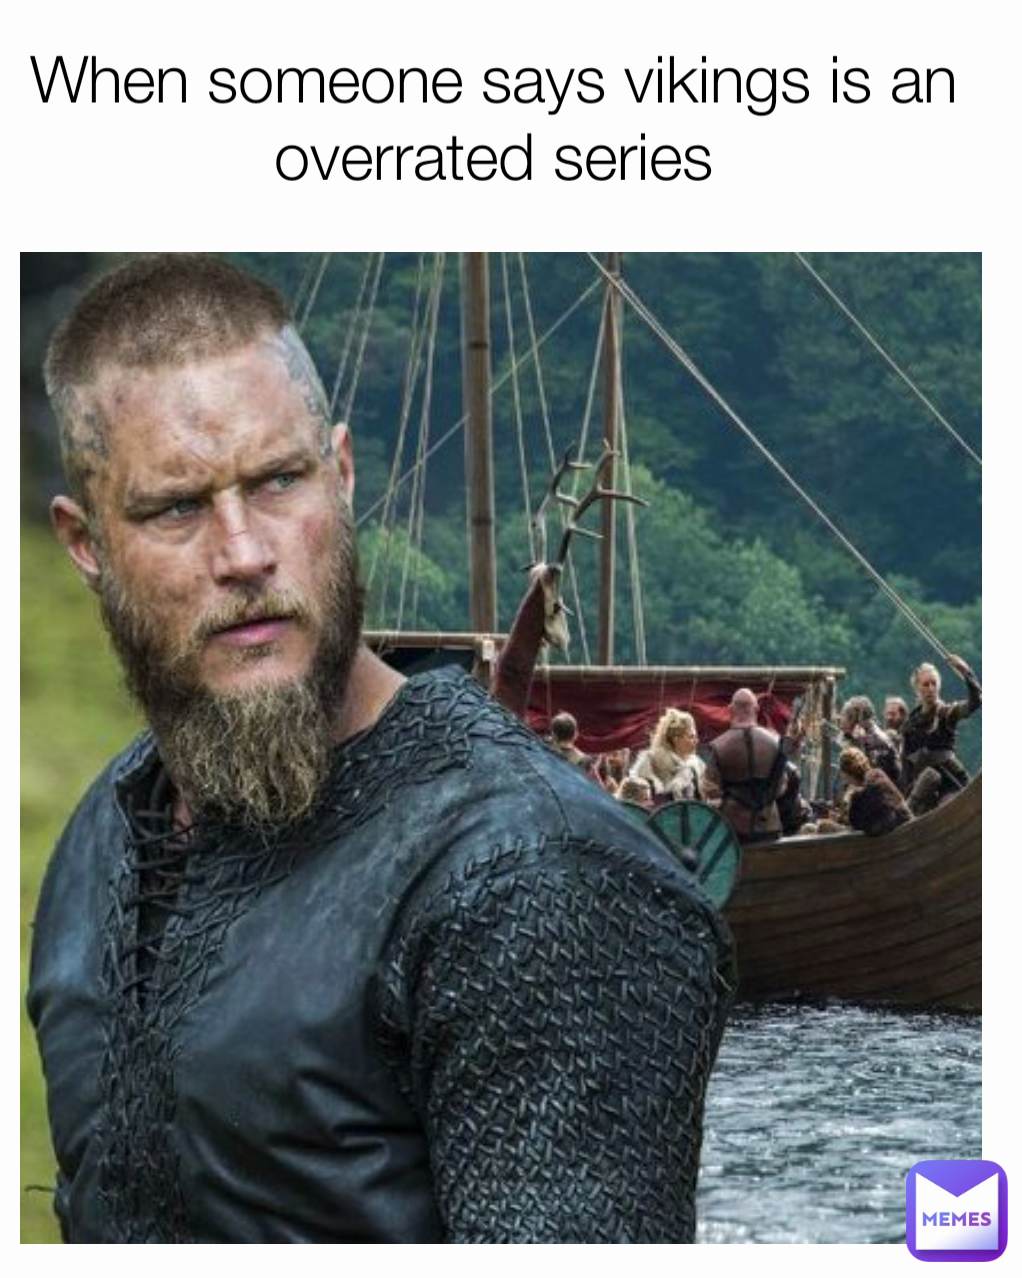 When someone says vikings is an overrated series